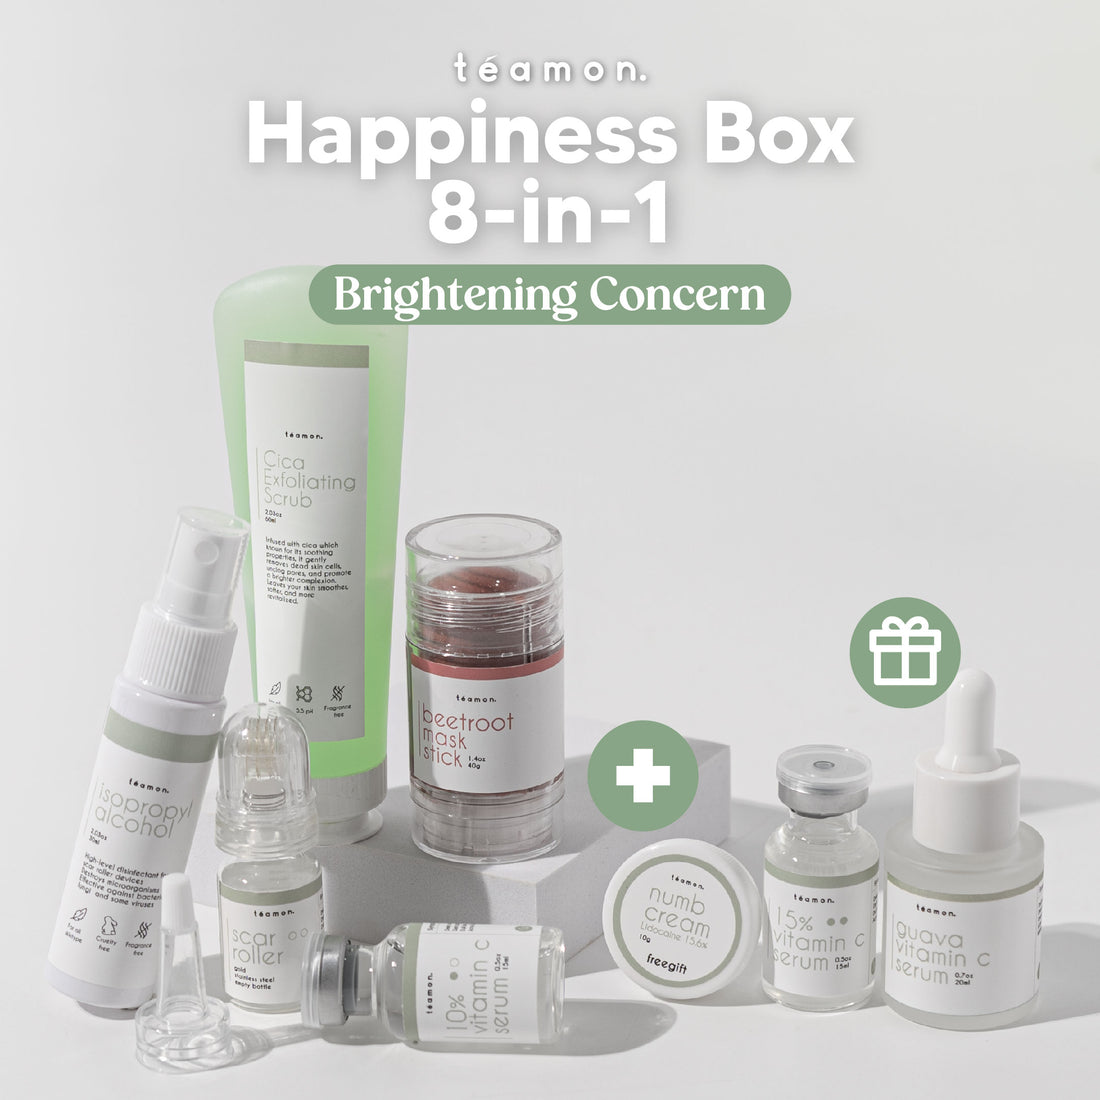 Happiness Box 8in1 - Brightening Concern